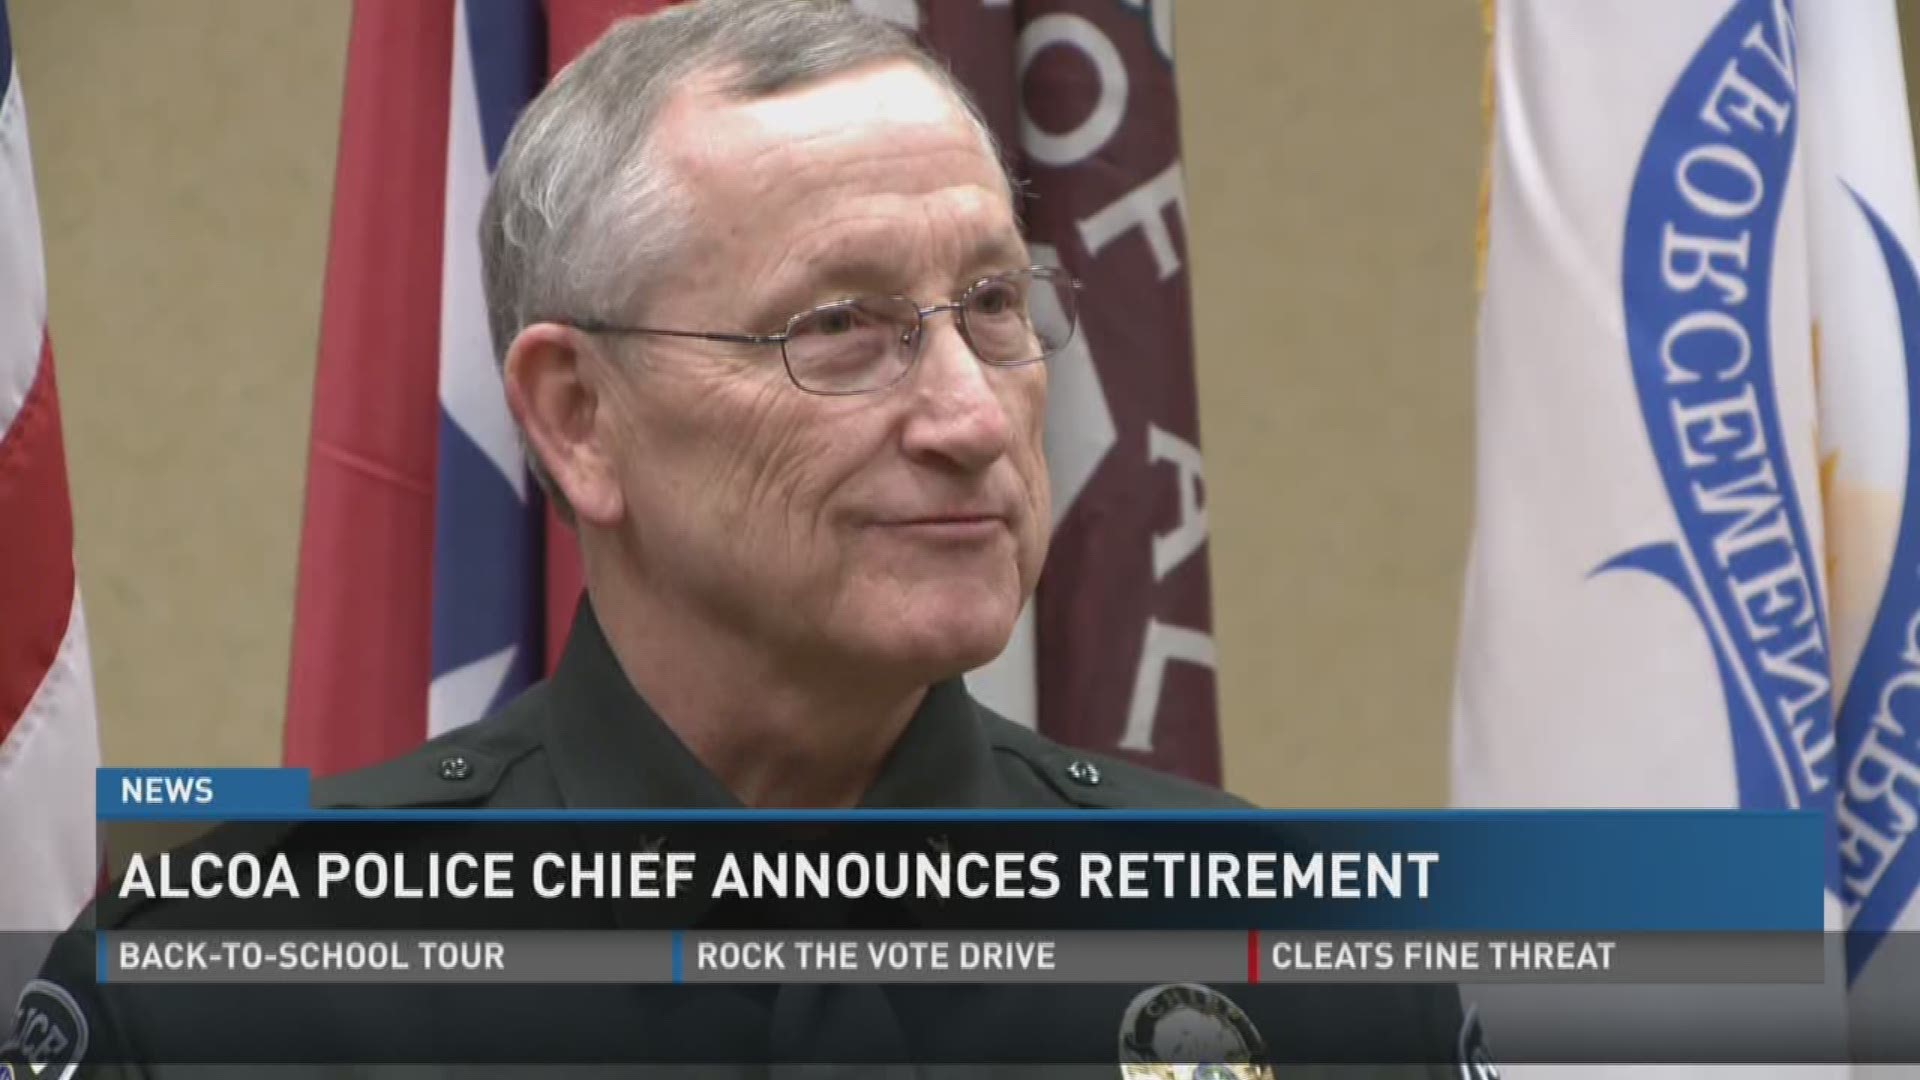 Alcoa Police Chief Philip Potter has told city officials and colleagues he is retiring.